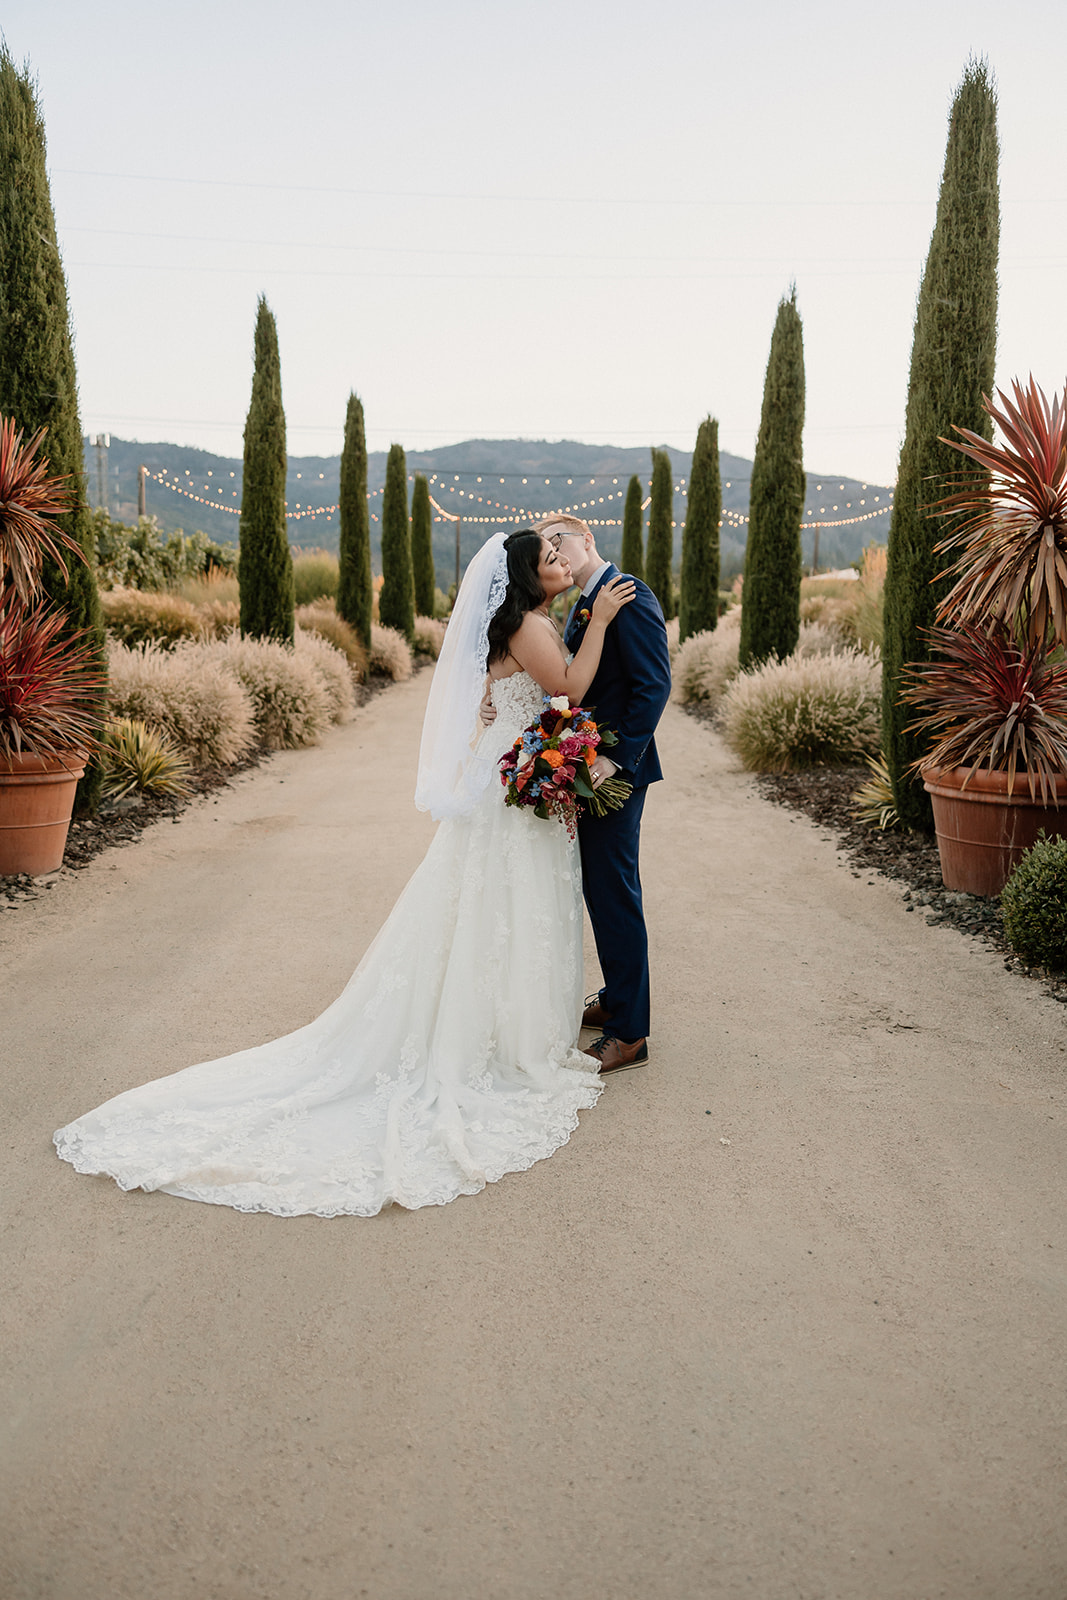 A bride and groom smiling under a wooden arch with colorful flowers, in a vineyard setting at Tre Posti wedding venue